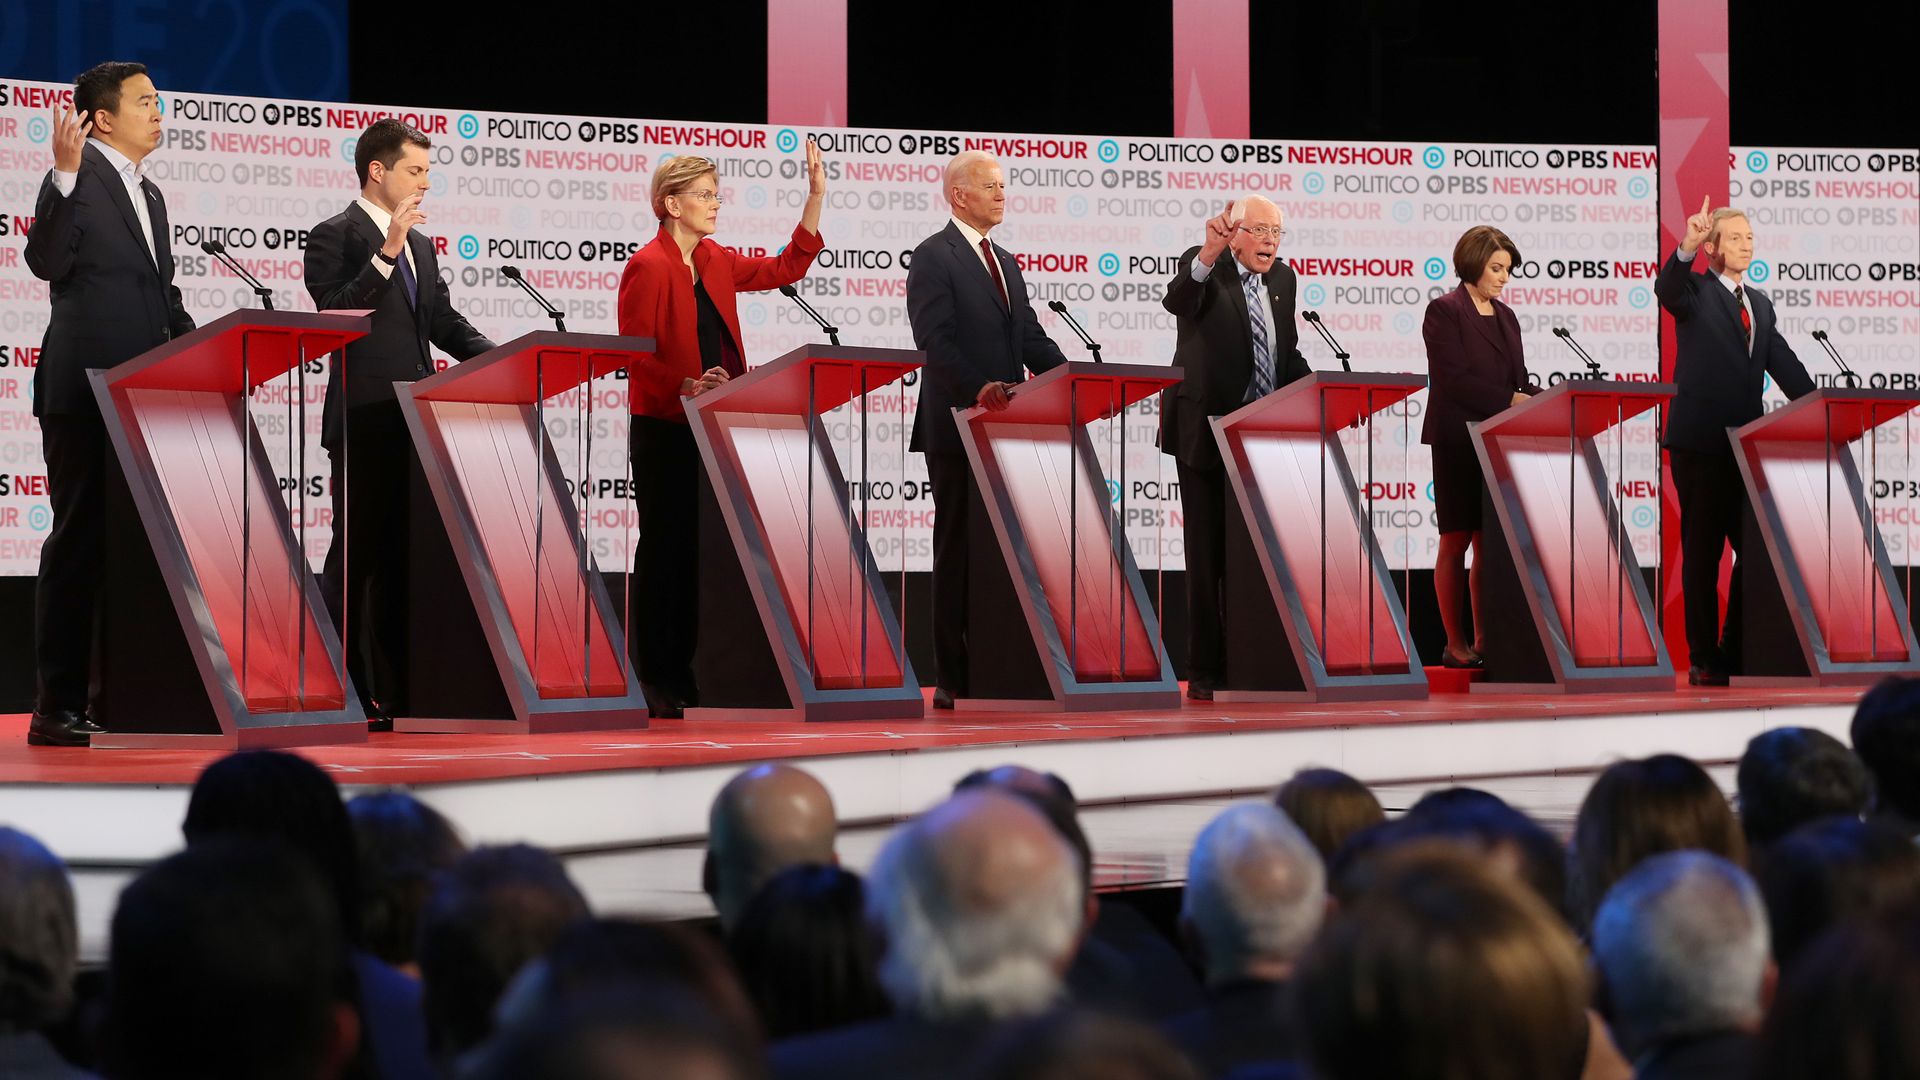 Candidates at their podiums during the debate.